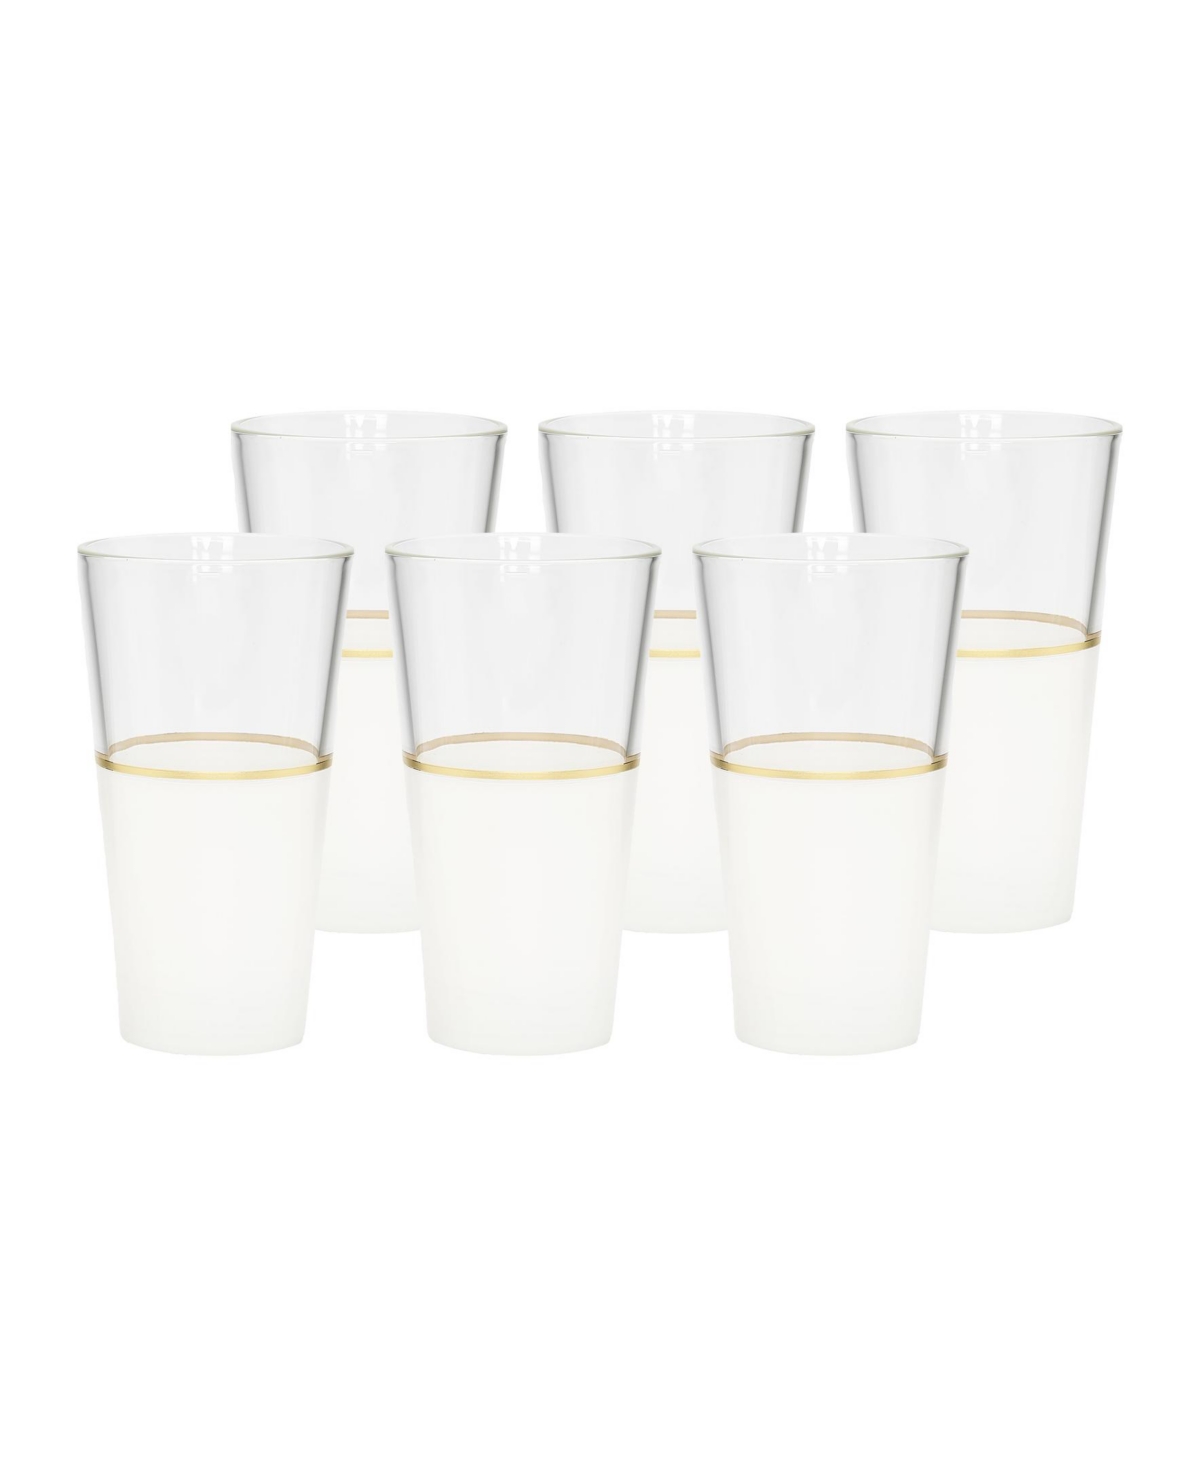 Classic Touch White Tumblers With Trim, Set Of 6